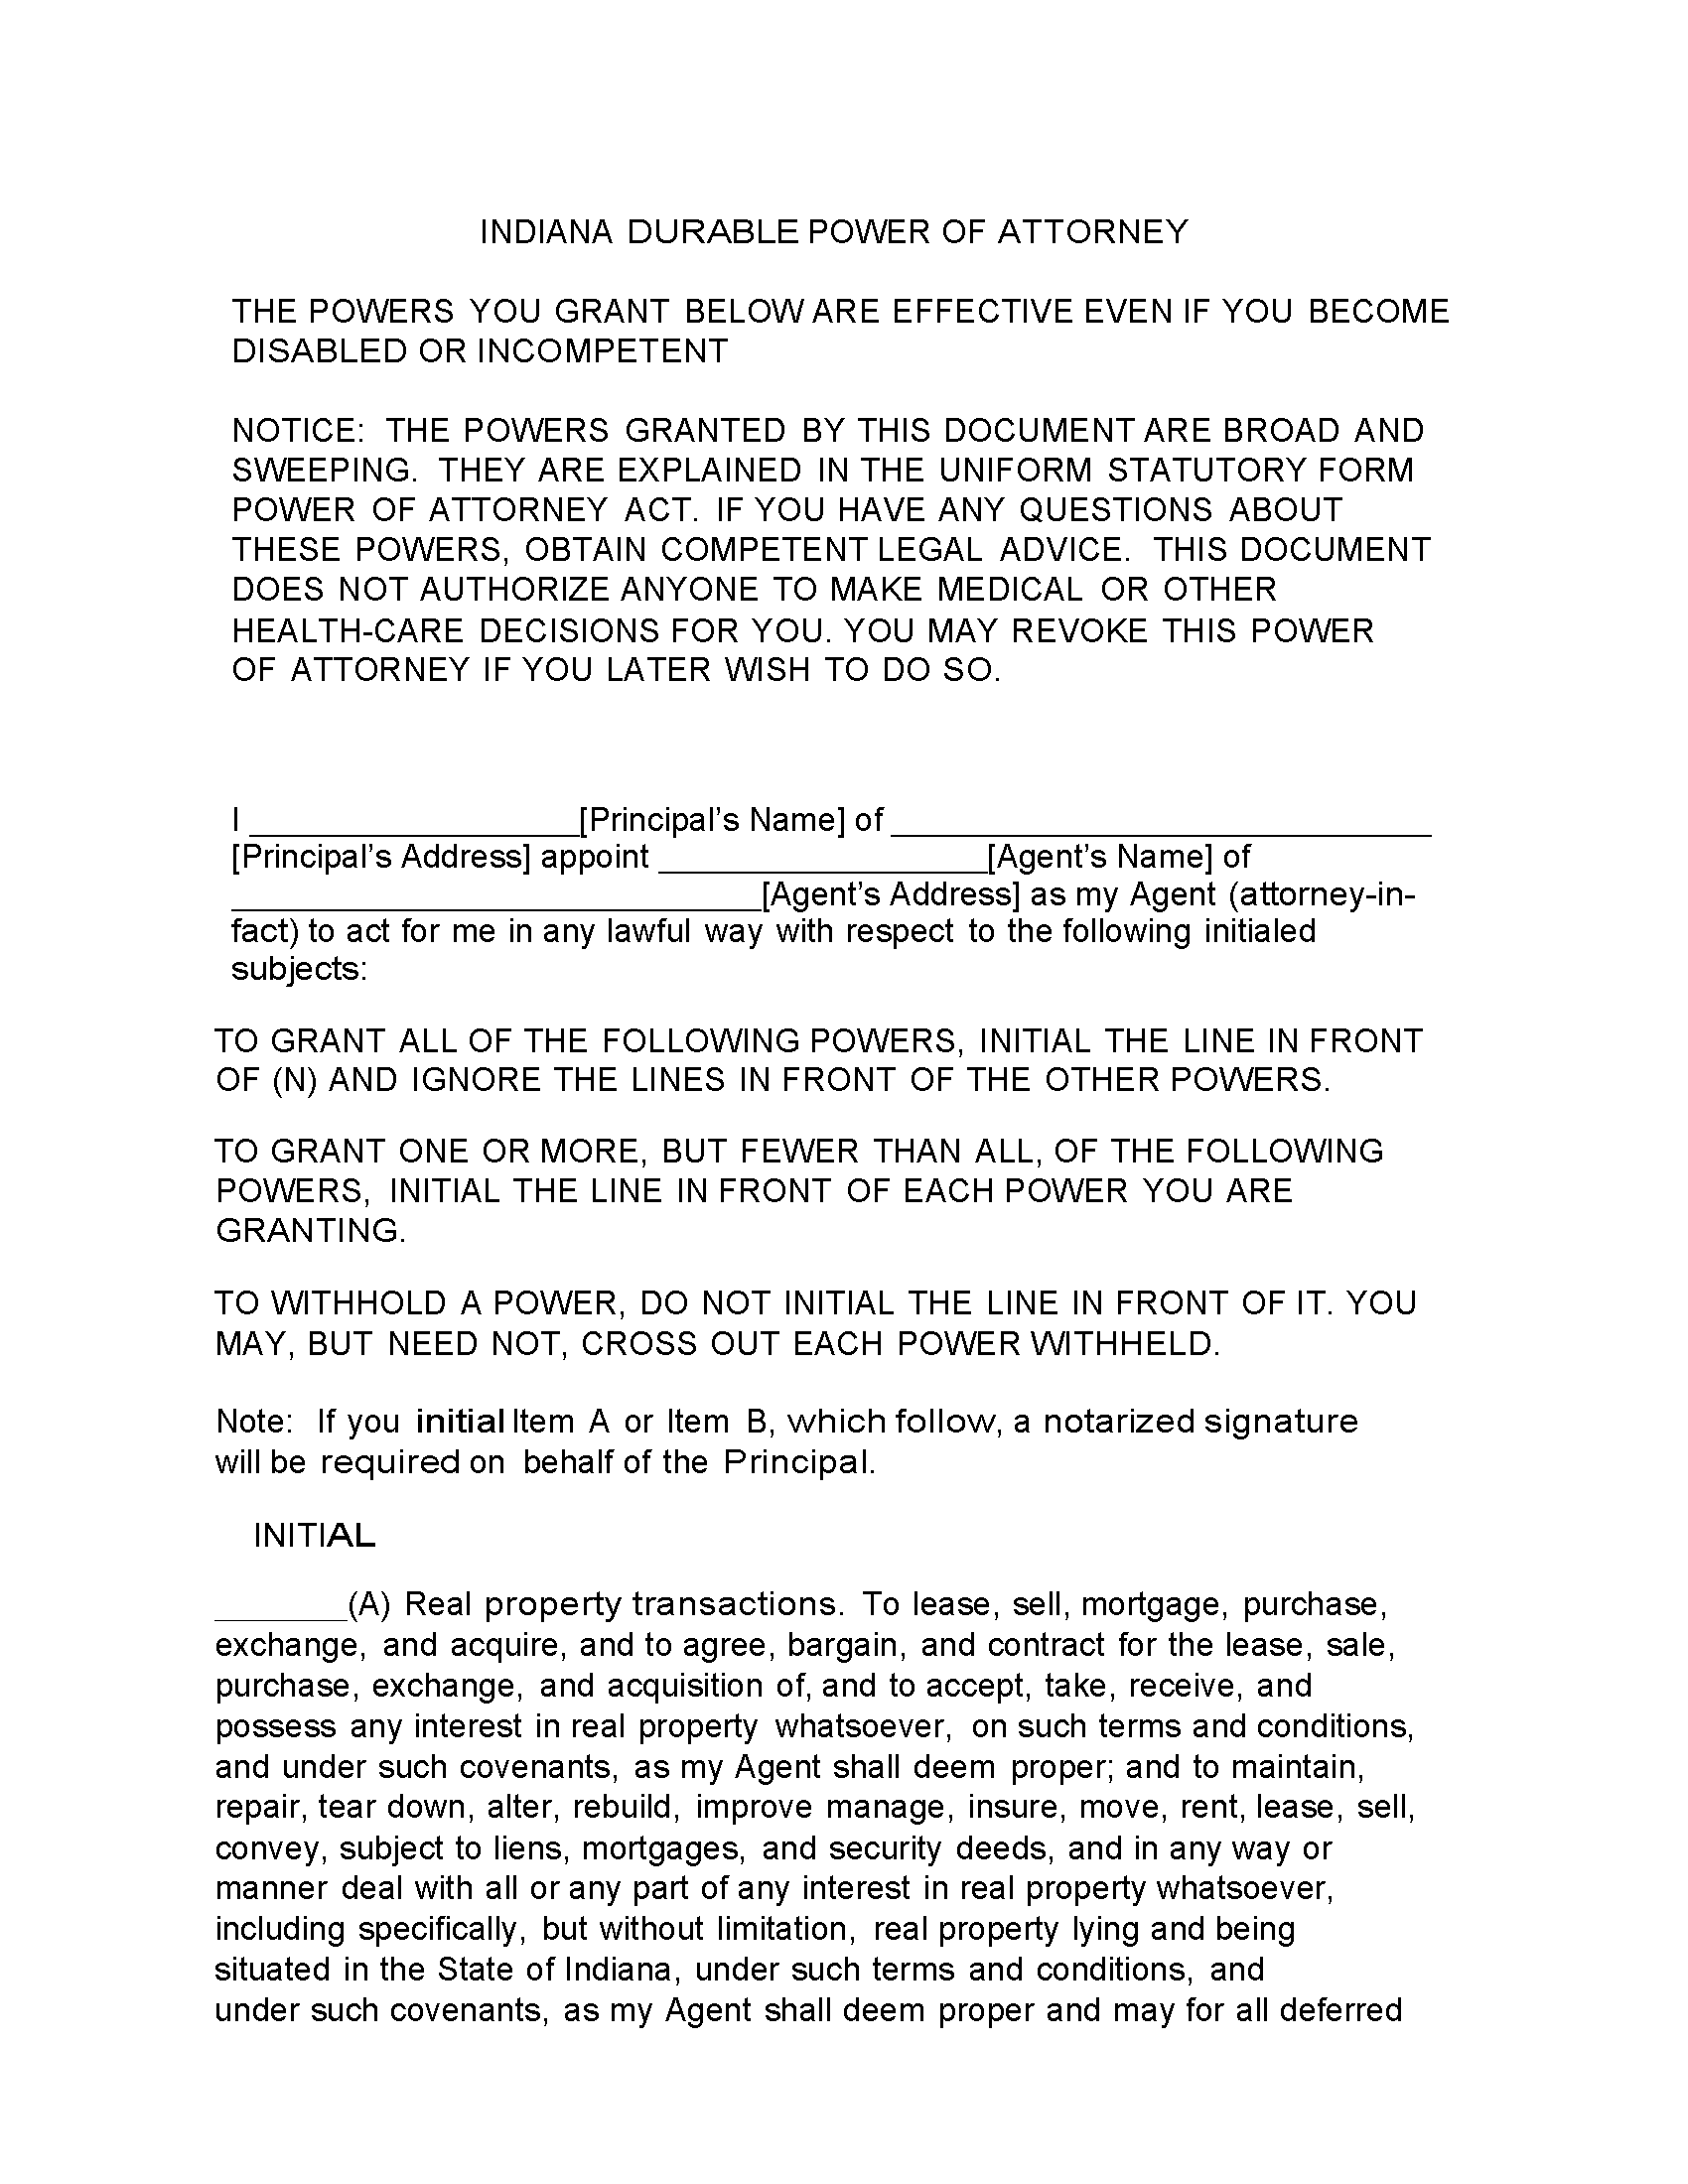 Indiana Durable Power of Attorney Form - Fillable PDF ...